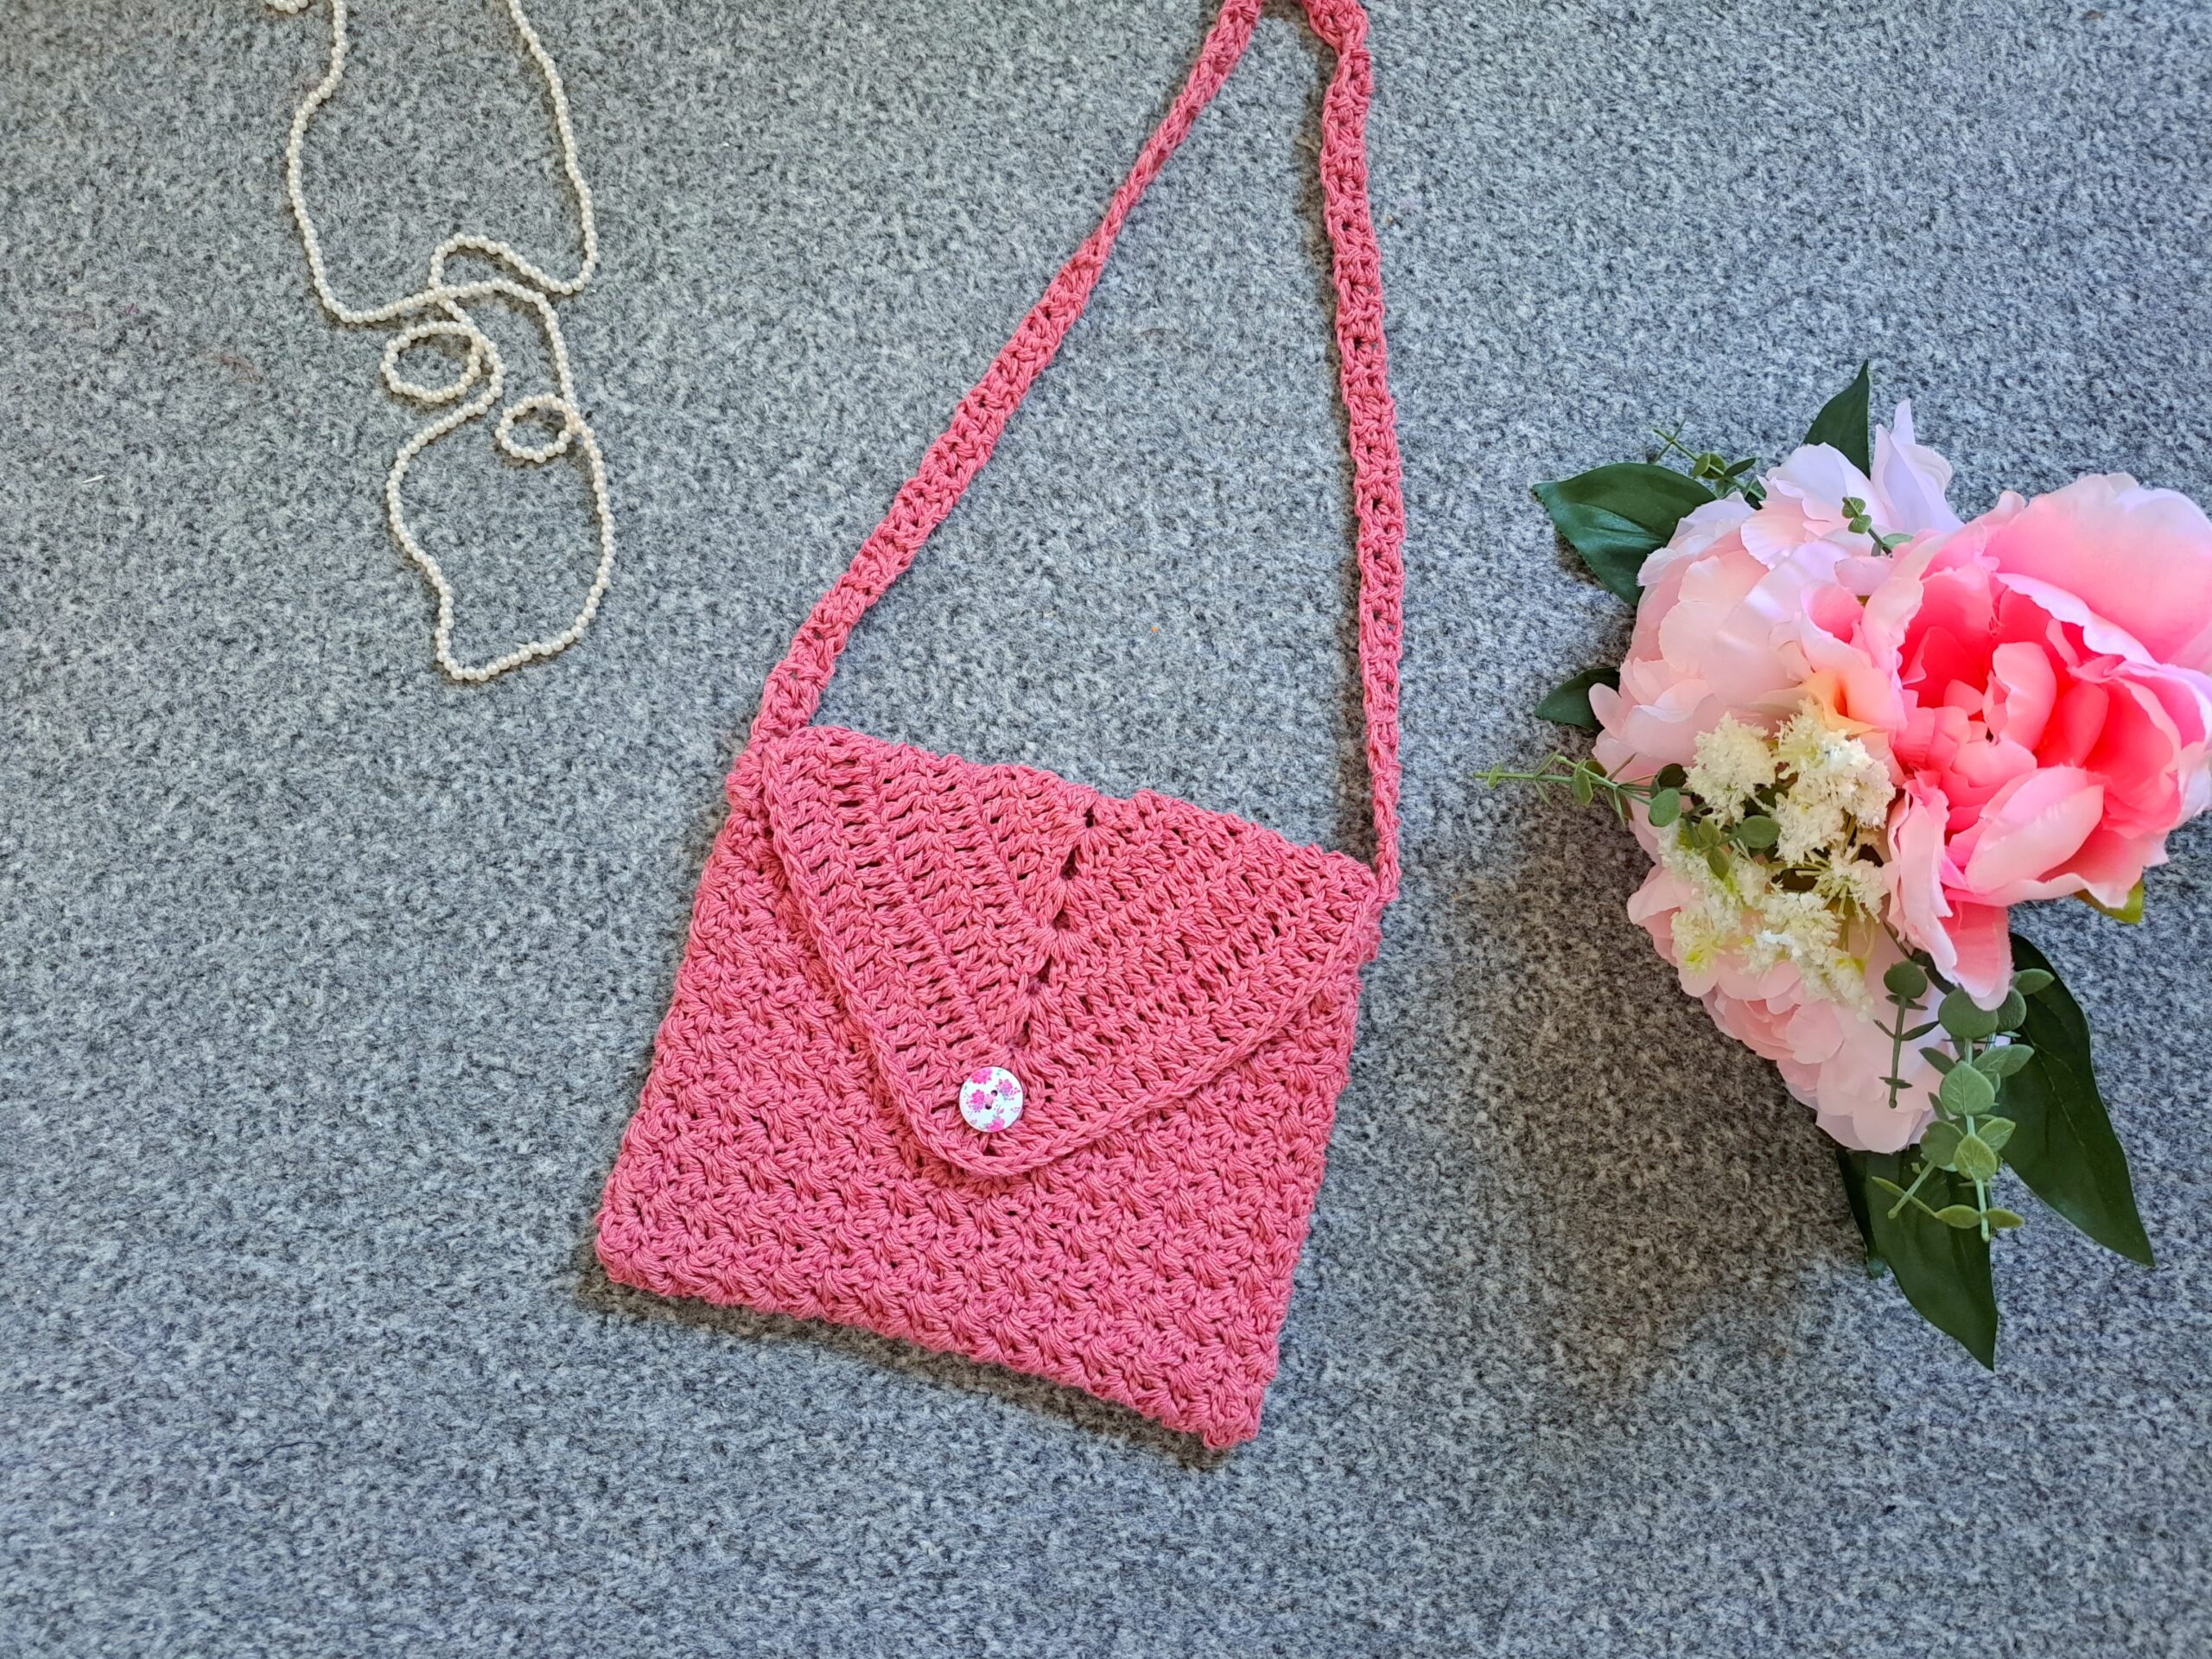 Boho Sling Bag - Free Sewing Pattern - Love to Stitch and Sew